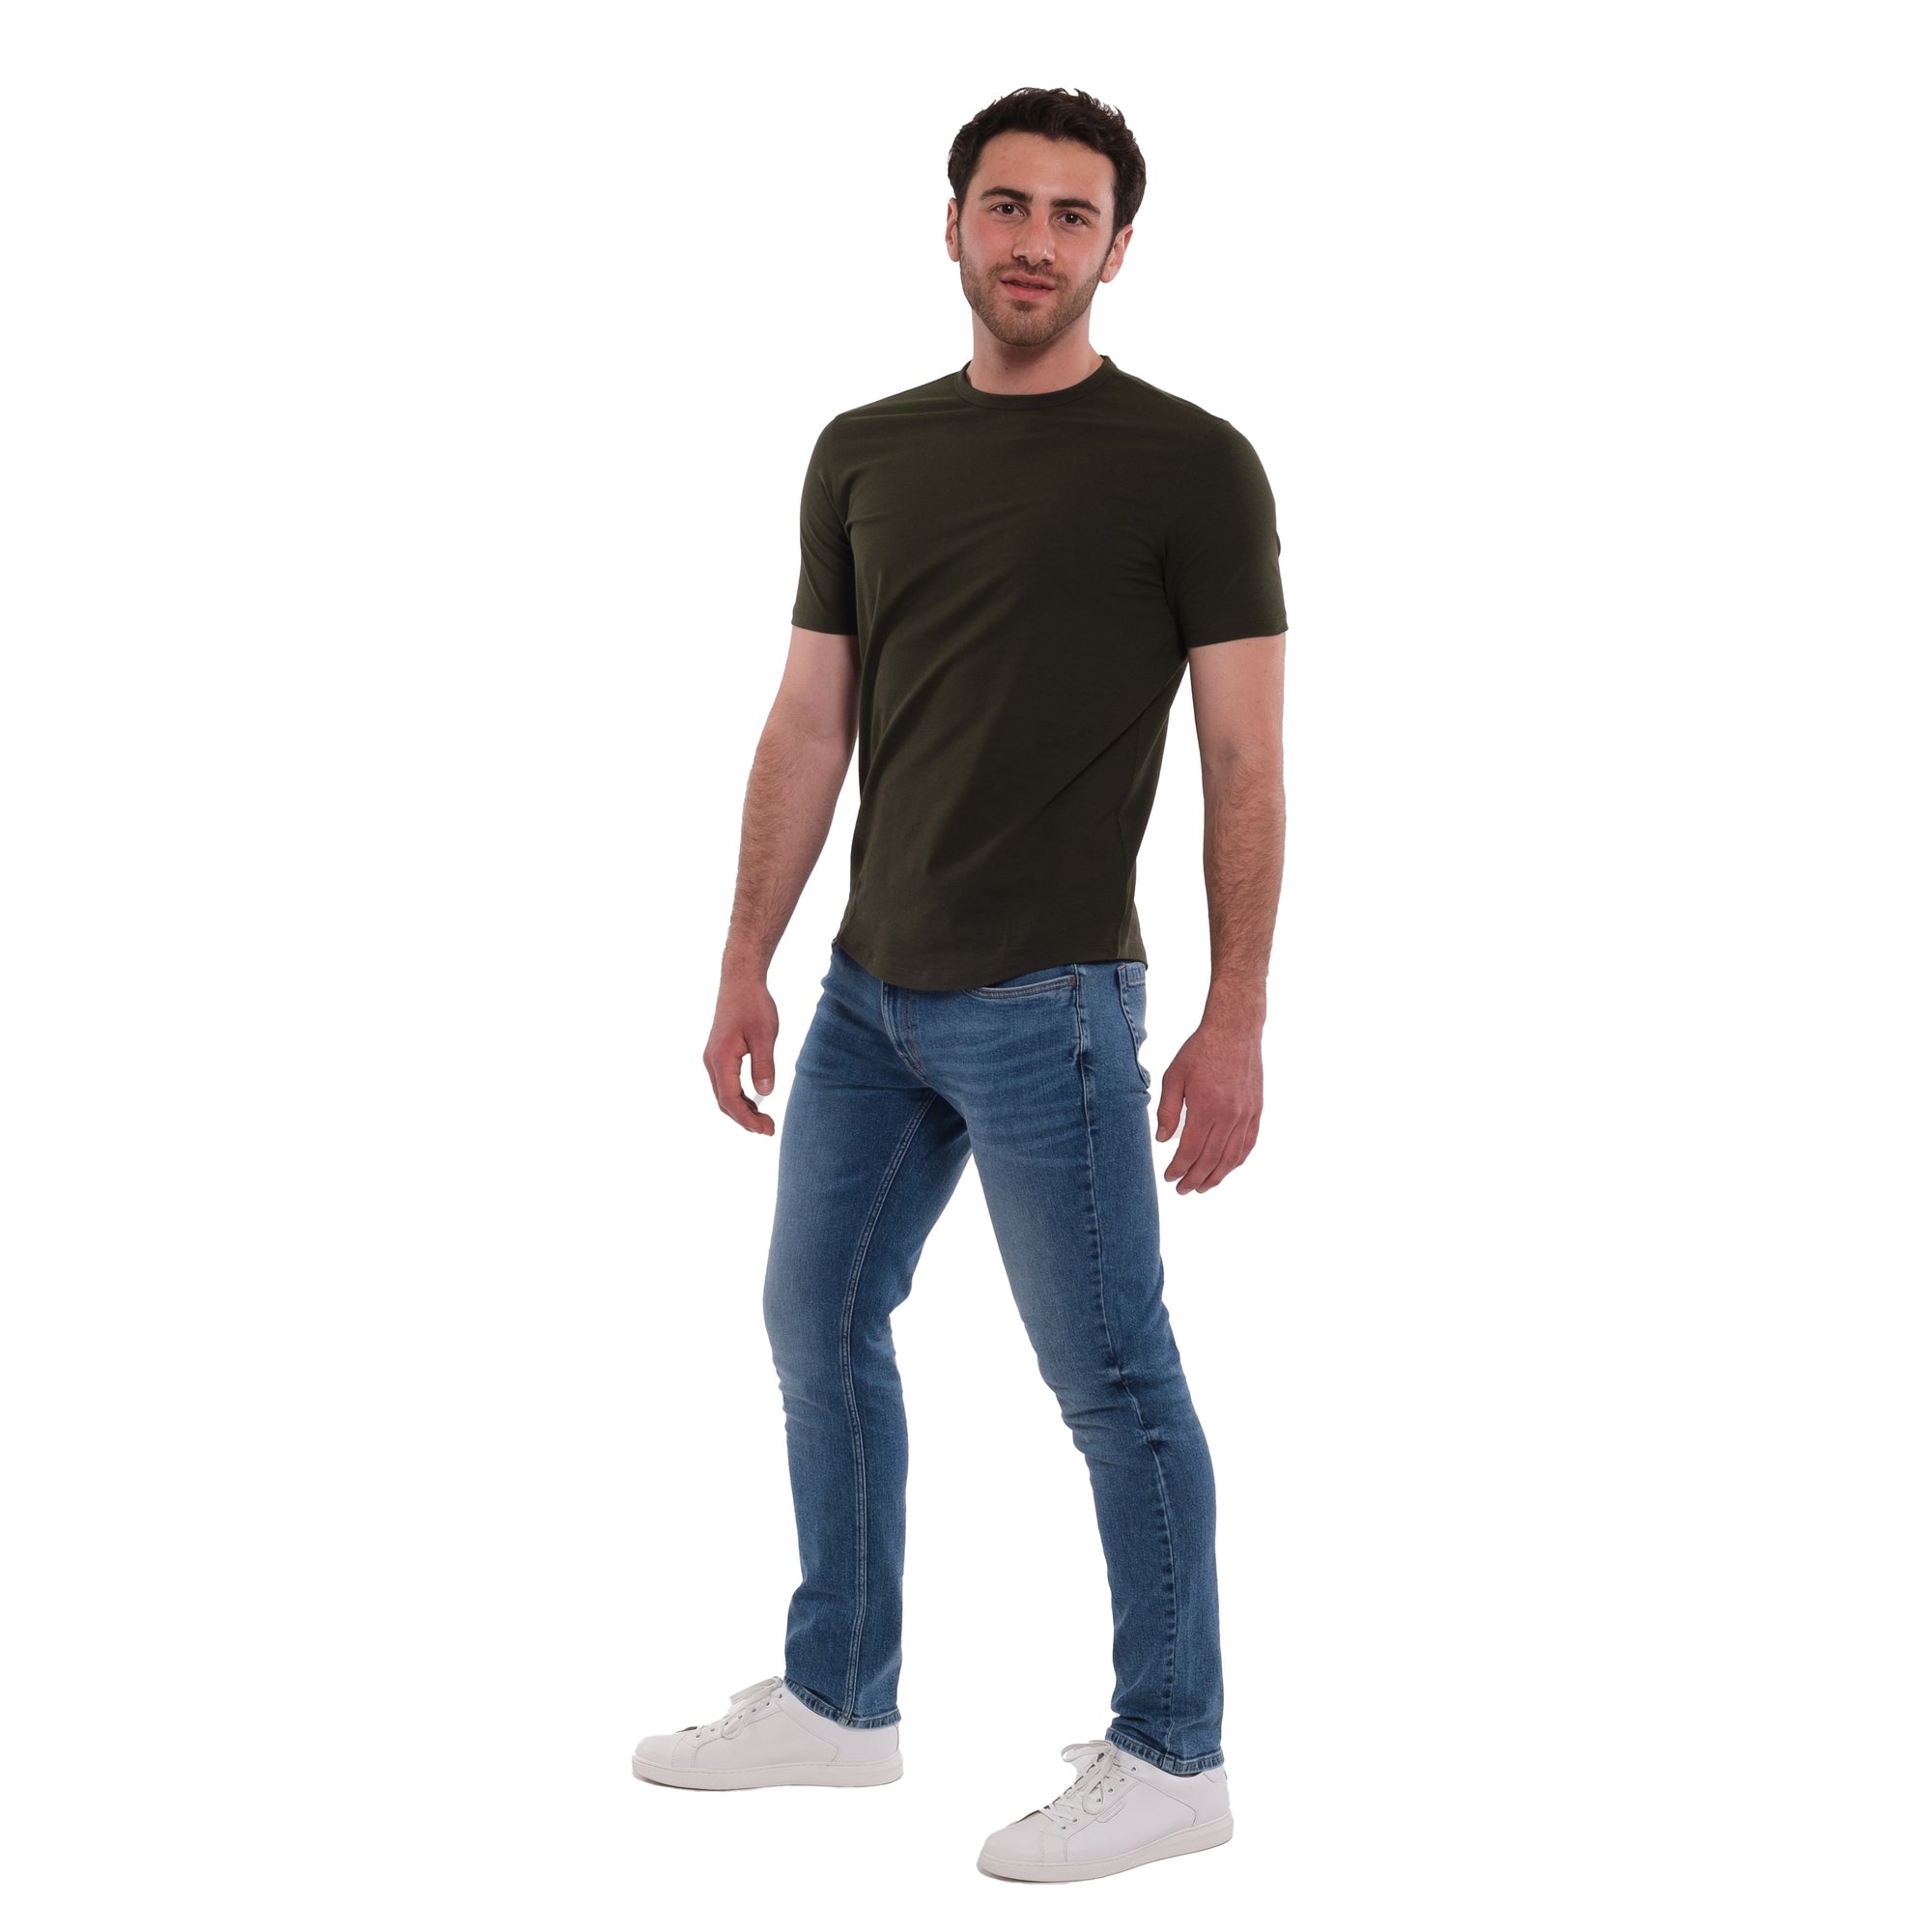 Men's Light Wash Jeans | The Perfect Jean